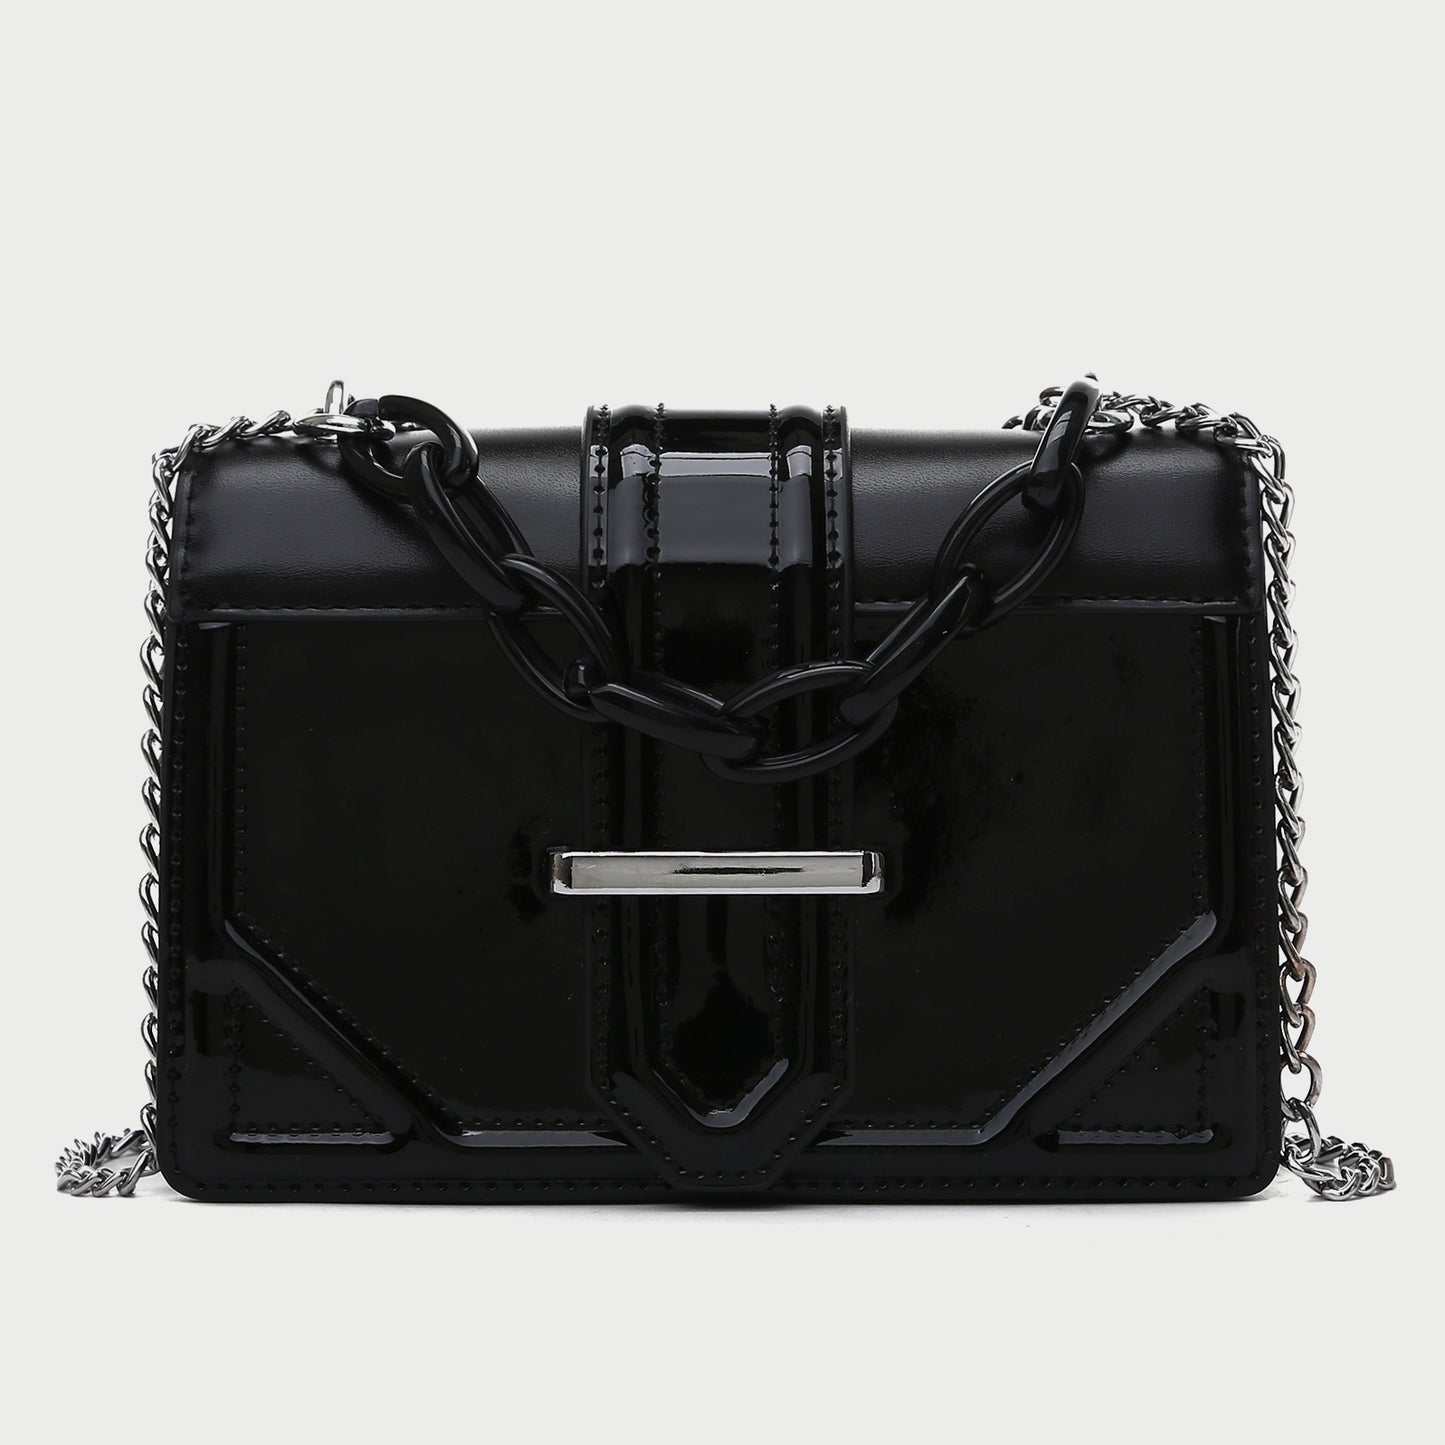 Contrast chain bordered flap PU leather crossbody bag